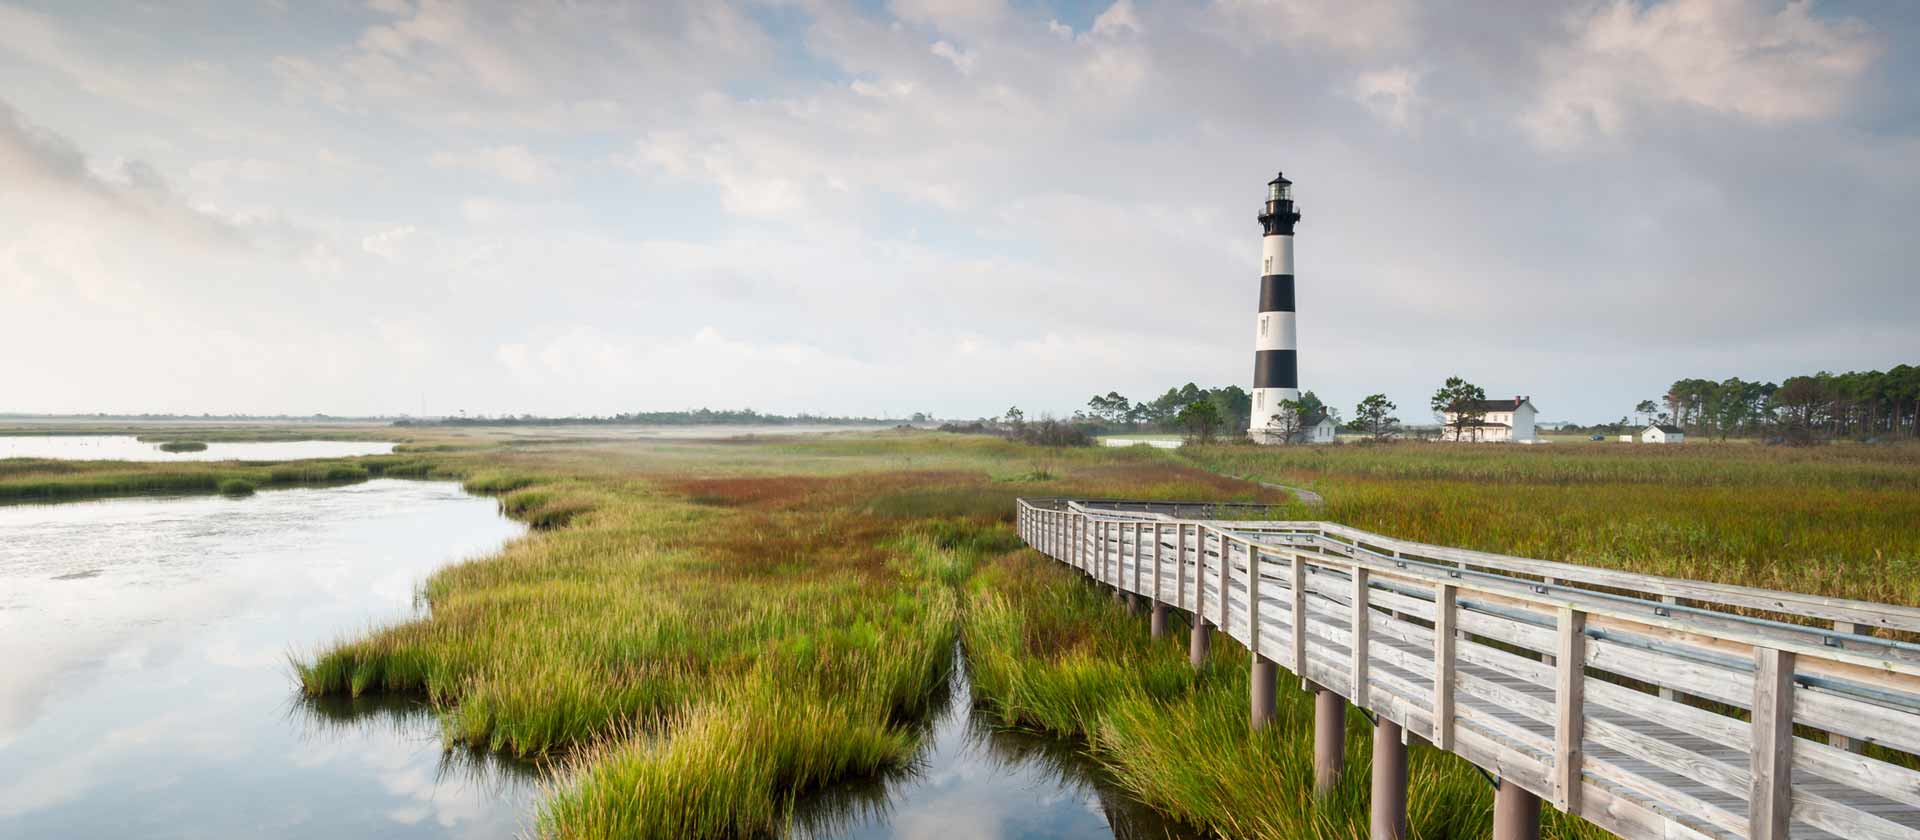 Wooden walkway to lighthouse on a marsh